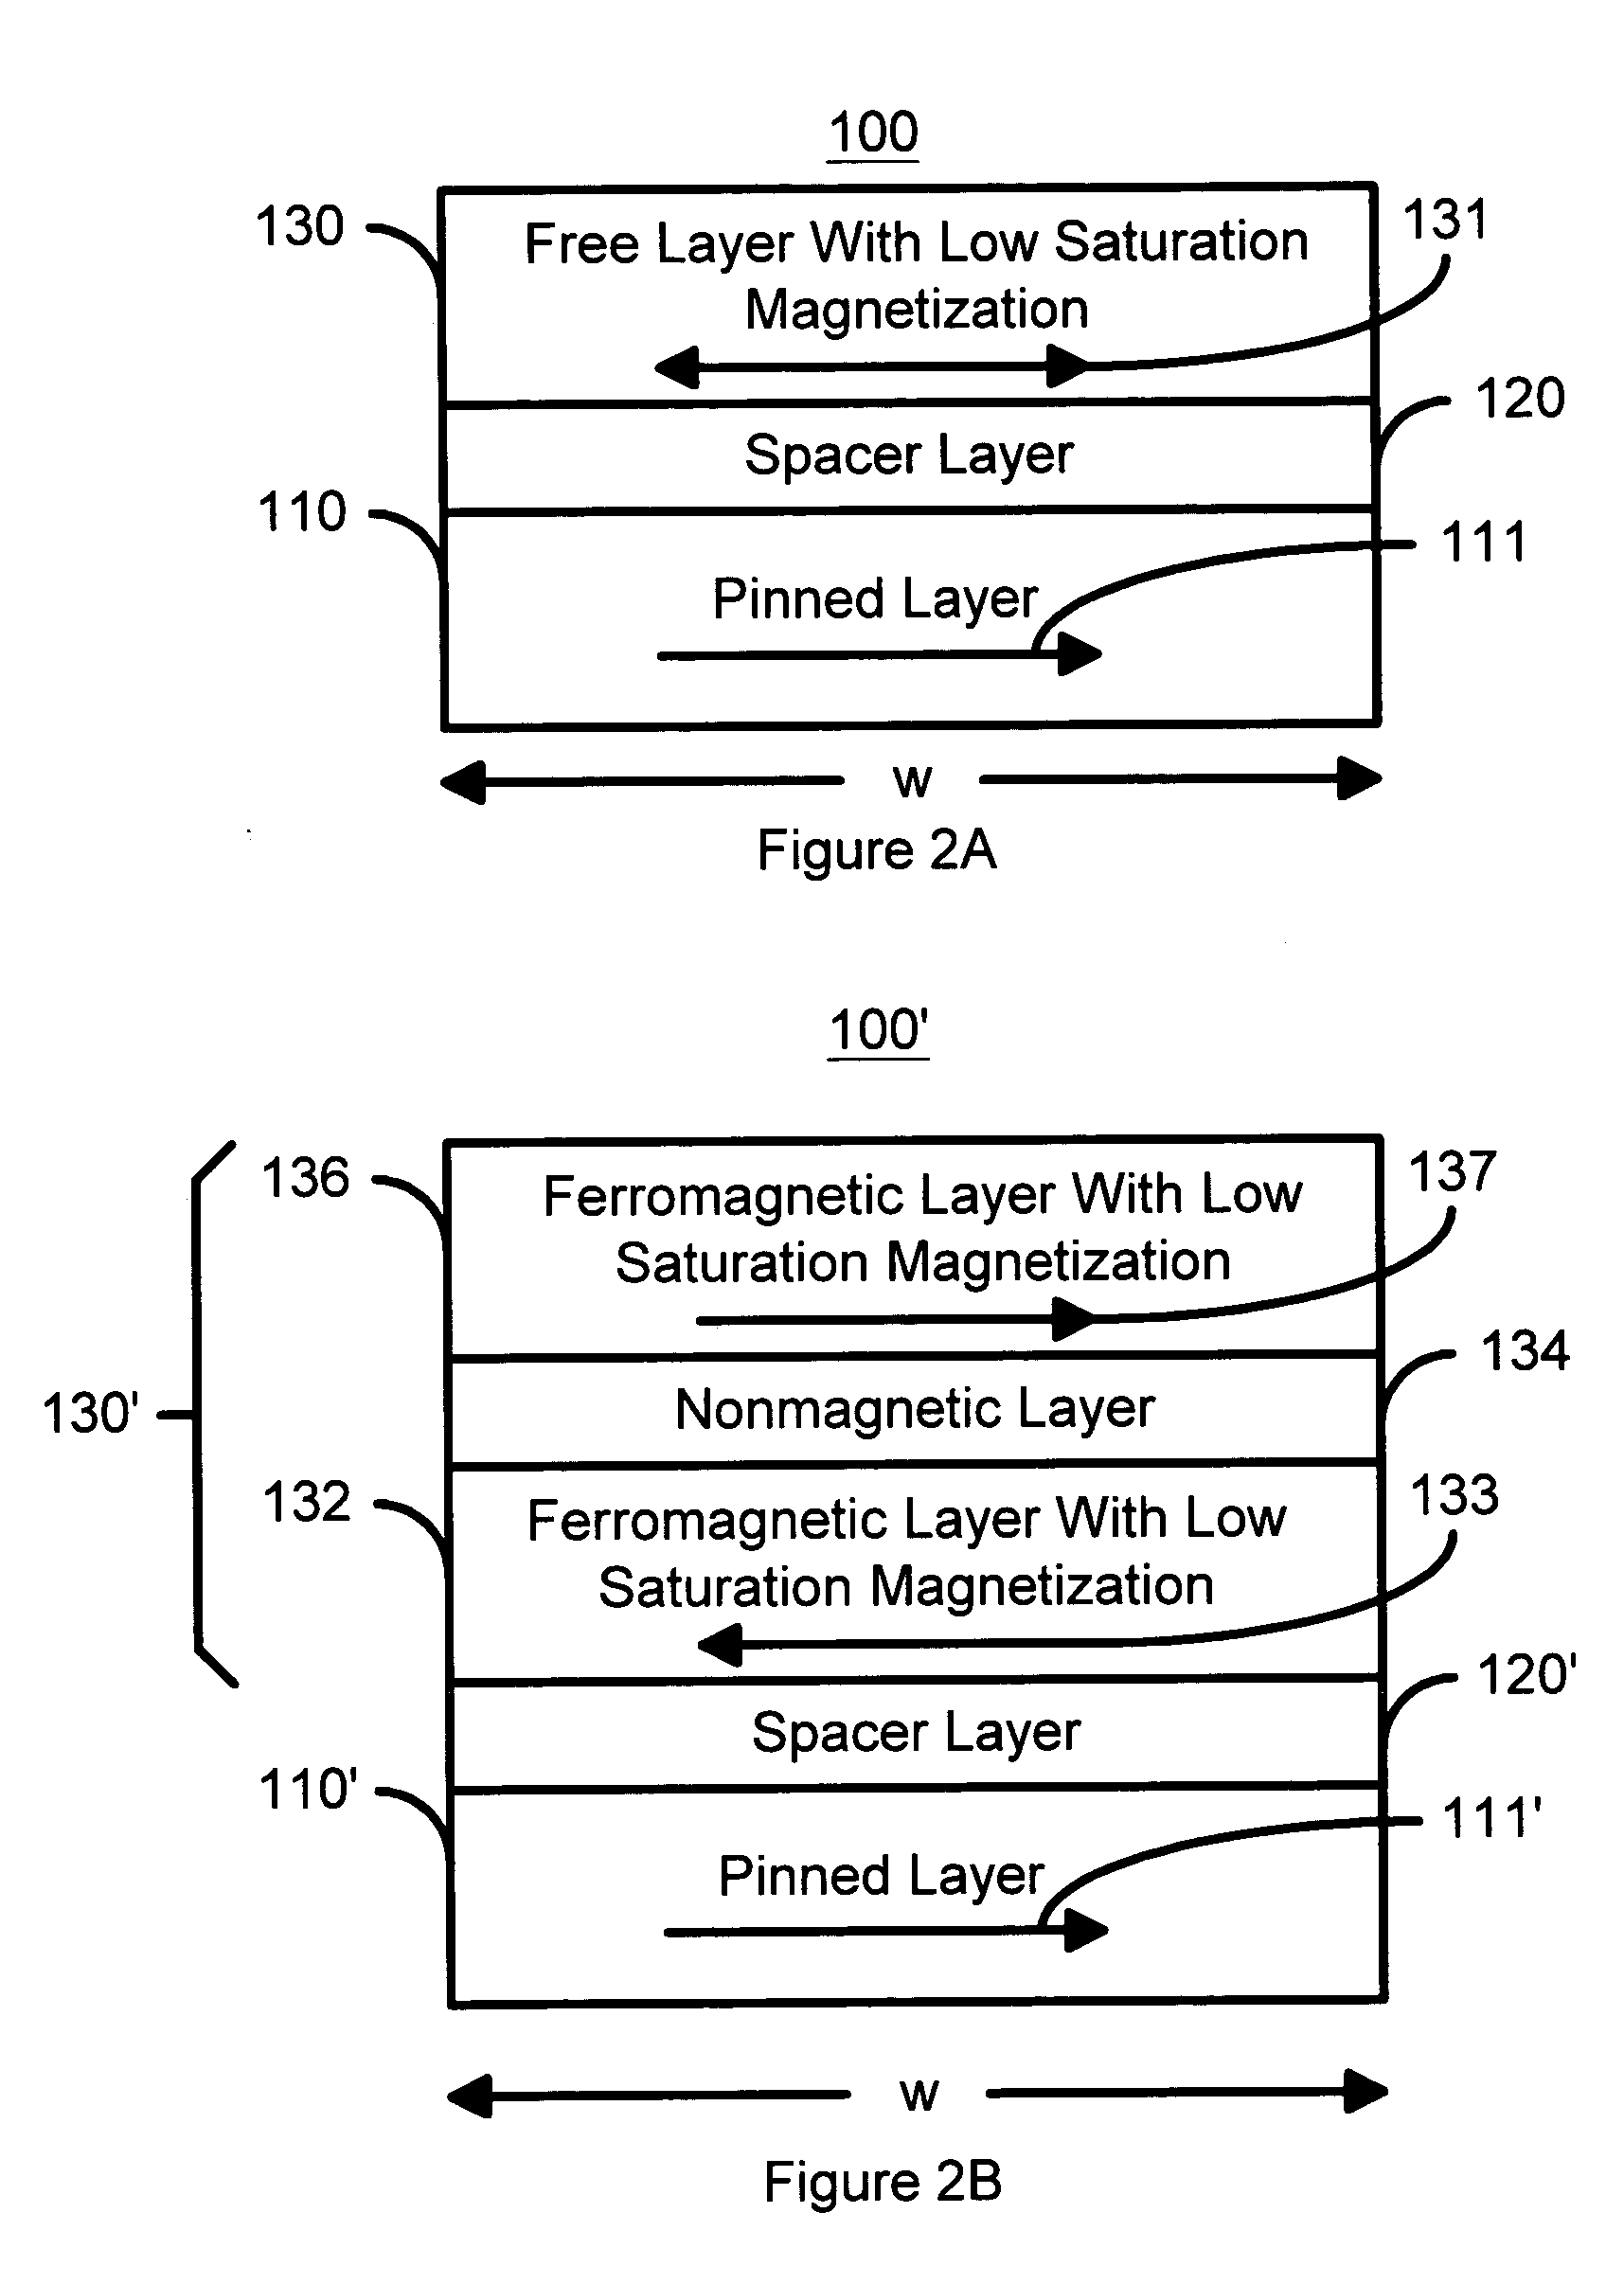 Spin transfer magnetic element having low saturation magnetization free layers